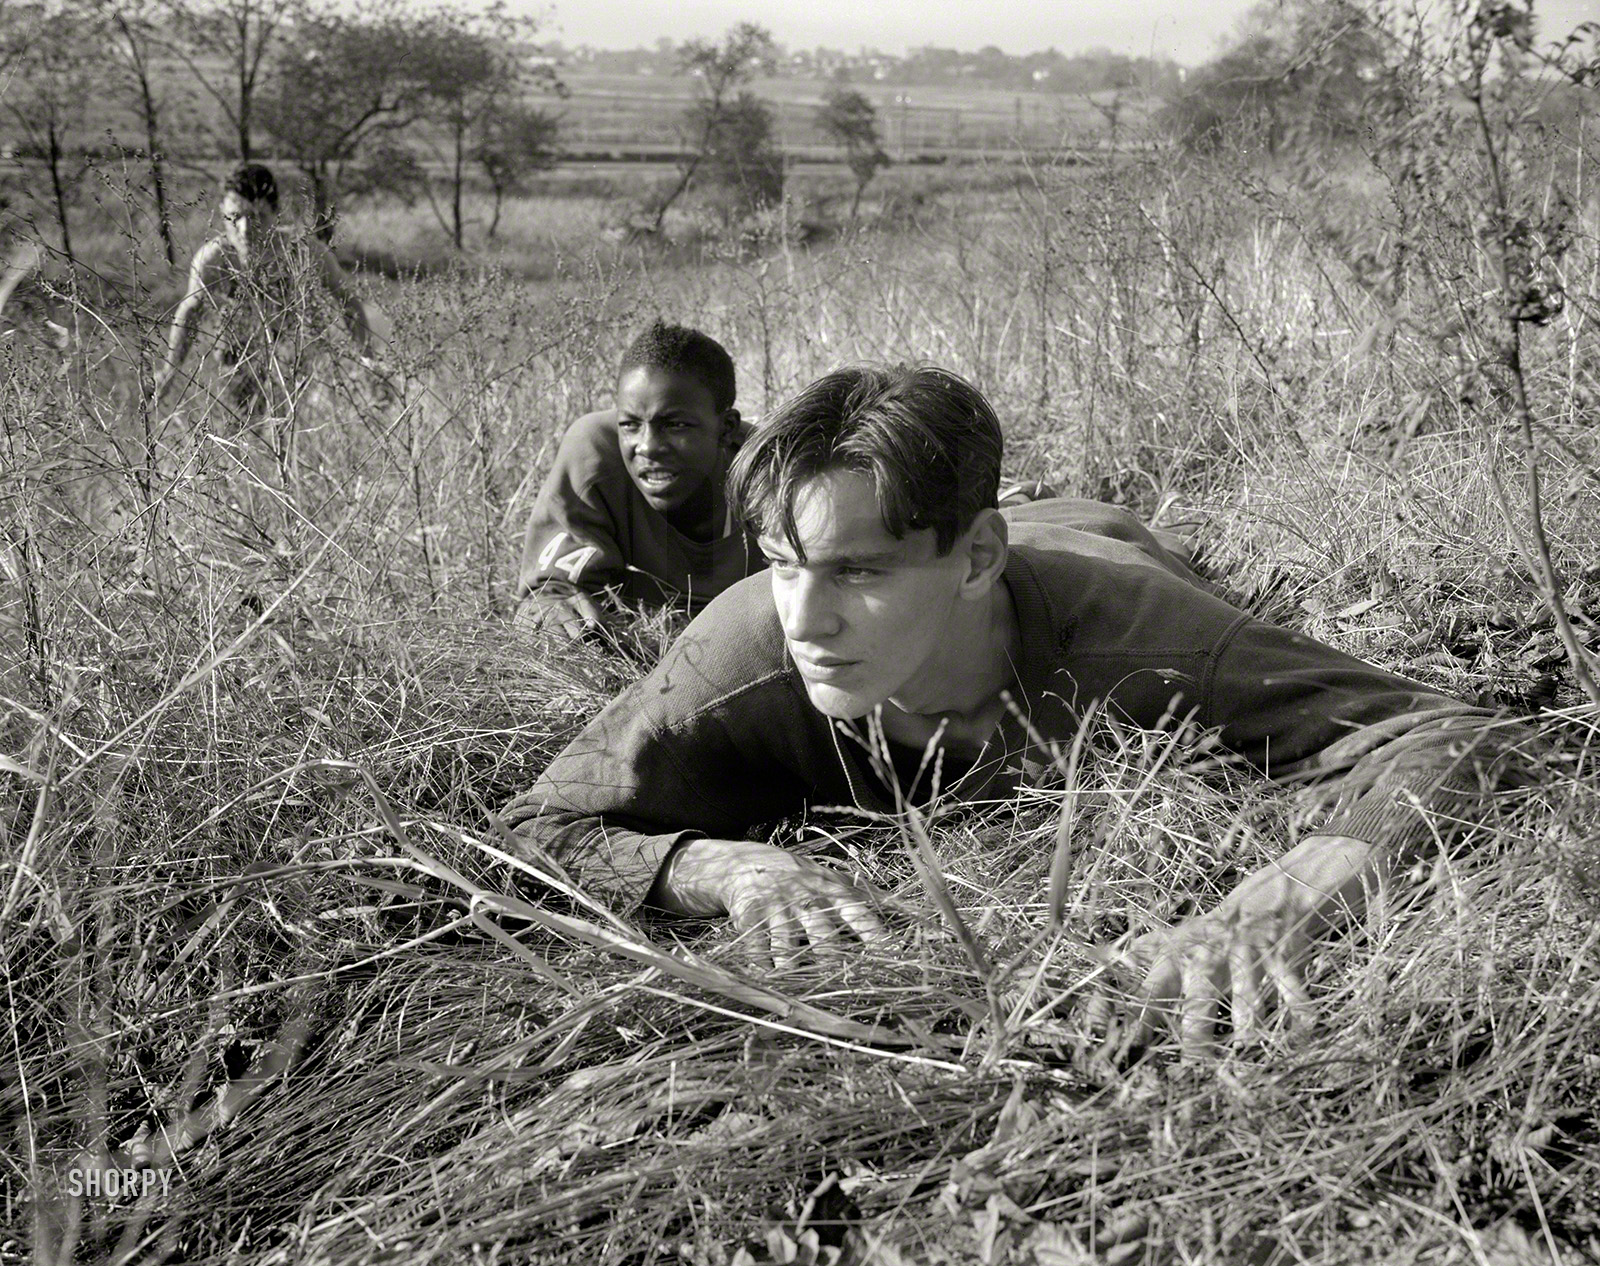 October 1942. "High school Victory Corps. Learning the rudiments of advancing on an enemy will prove valuable to these boys if they are called to join their older brothers in the armed forces. This is part of the 'commando' training given in physical education courses at Flushing High School, Queens, New York." Photo by William Perlitch for the Office of War Information. View full size.